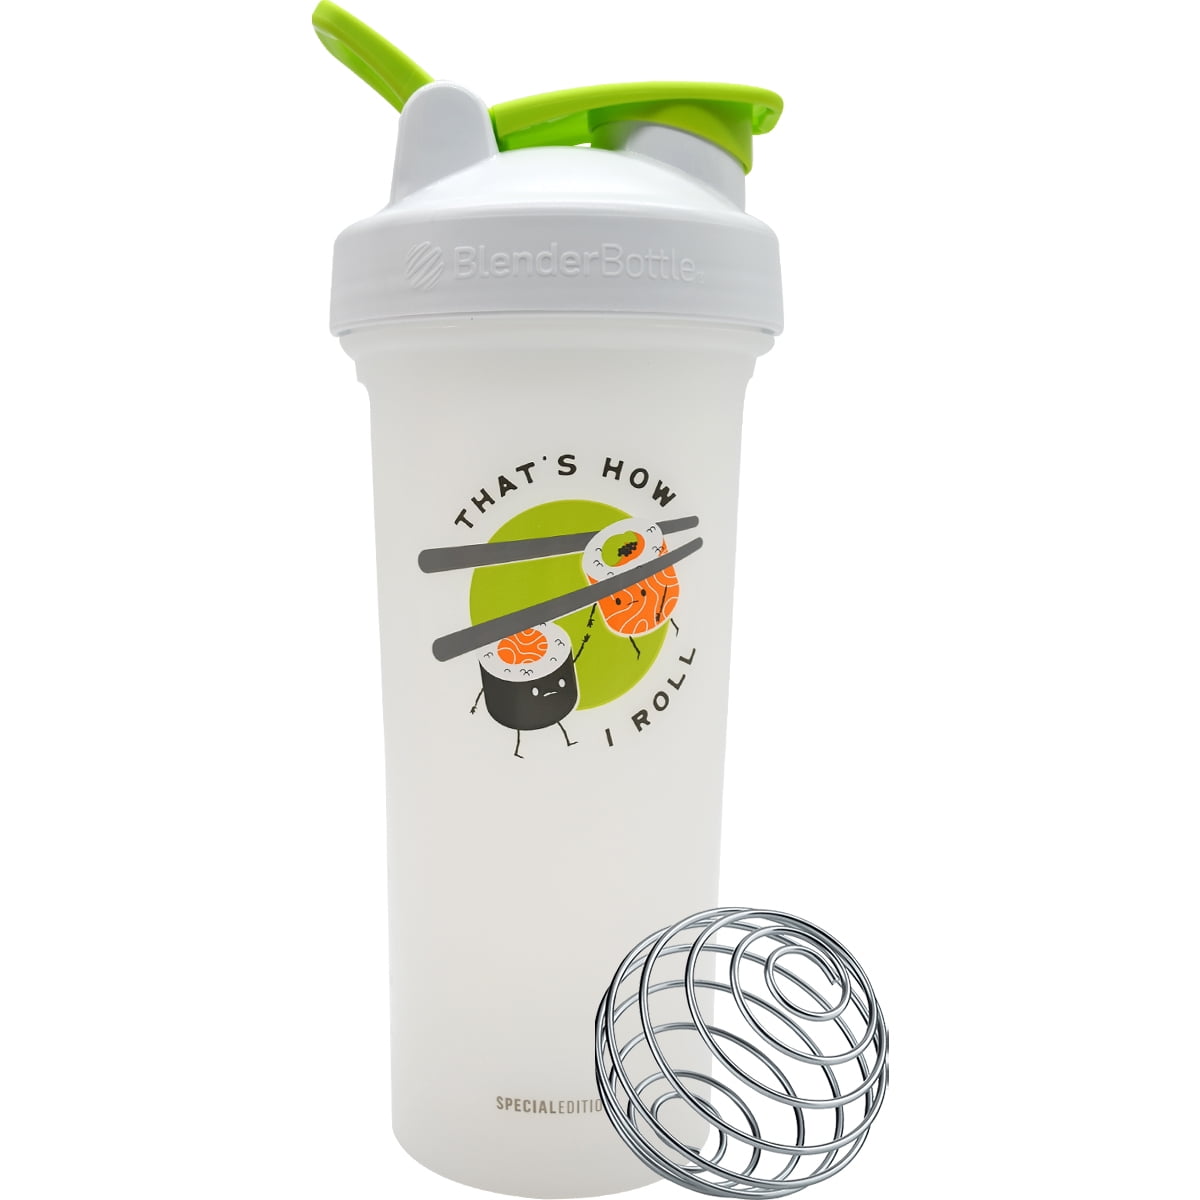 Helimix 2.0 Vortex Blender Shaker Bottle 28oz Capacity, No Blending Ball  or Whisk, USA Made, Portable Pre Workout Whey Protein Drink Shaker Cup, Mixes Cocktails Smoothies Shakes